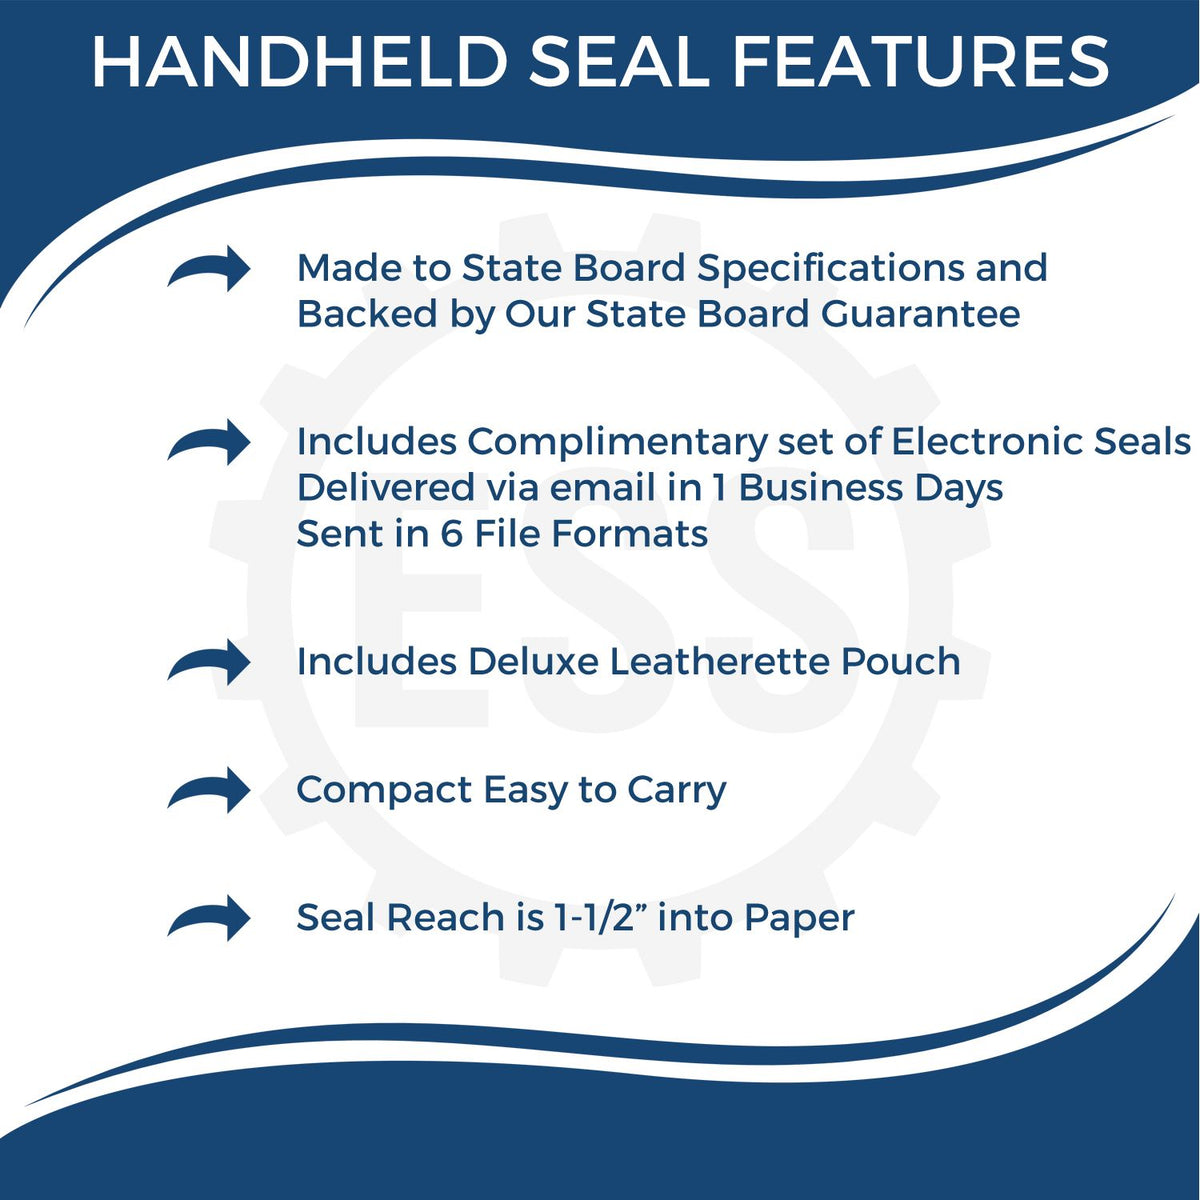 A picture of an infographic highlighting the selling points for the Handheld Connecticut Land Surveyor Seal